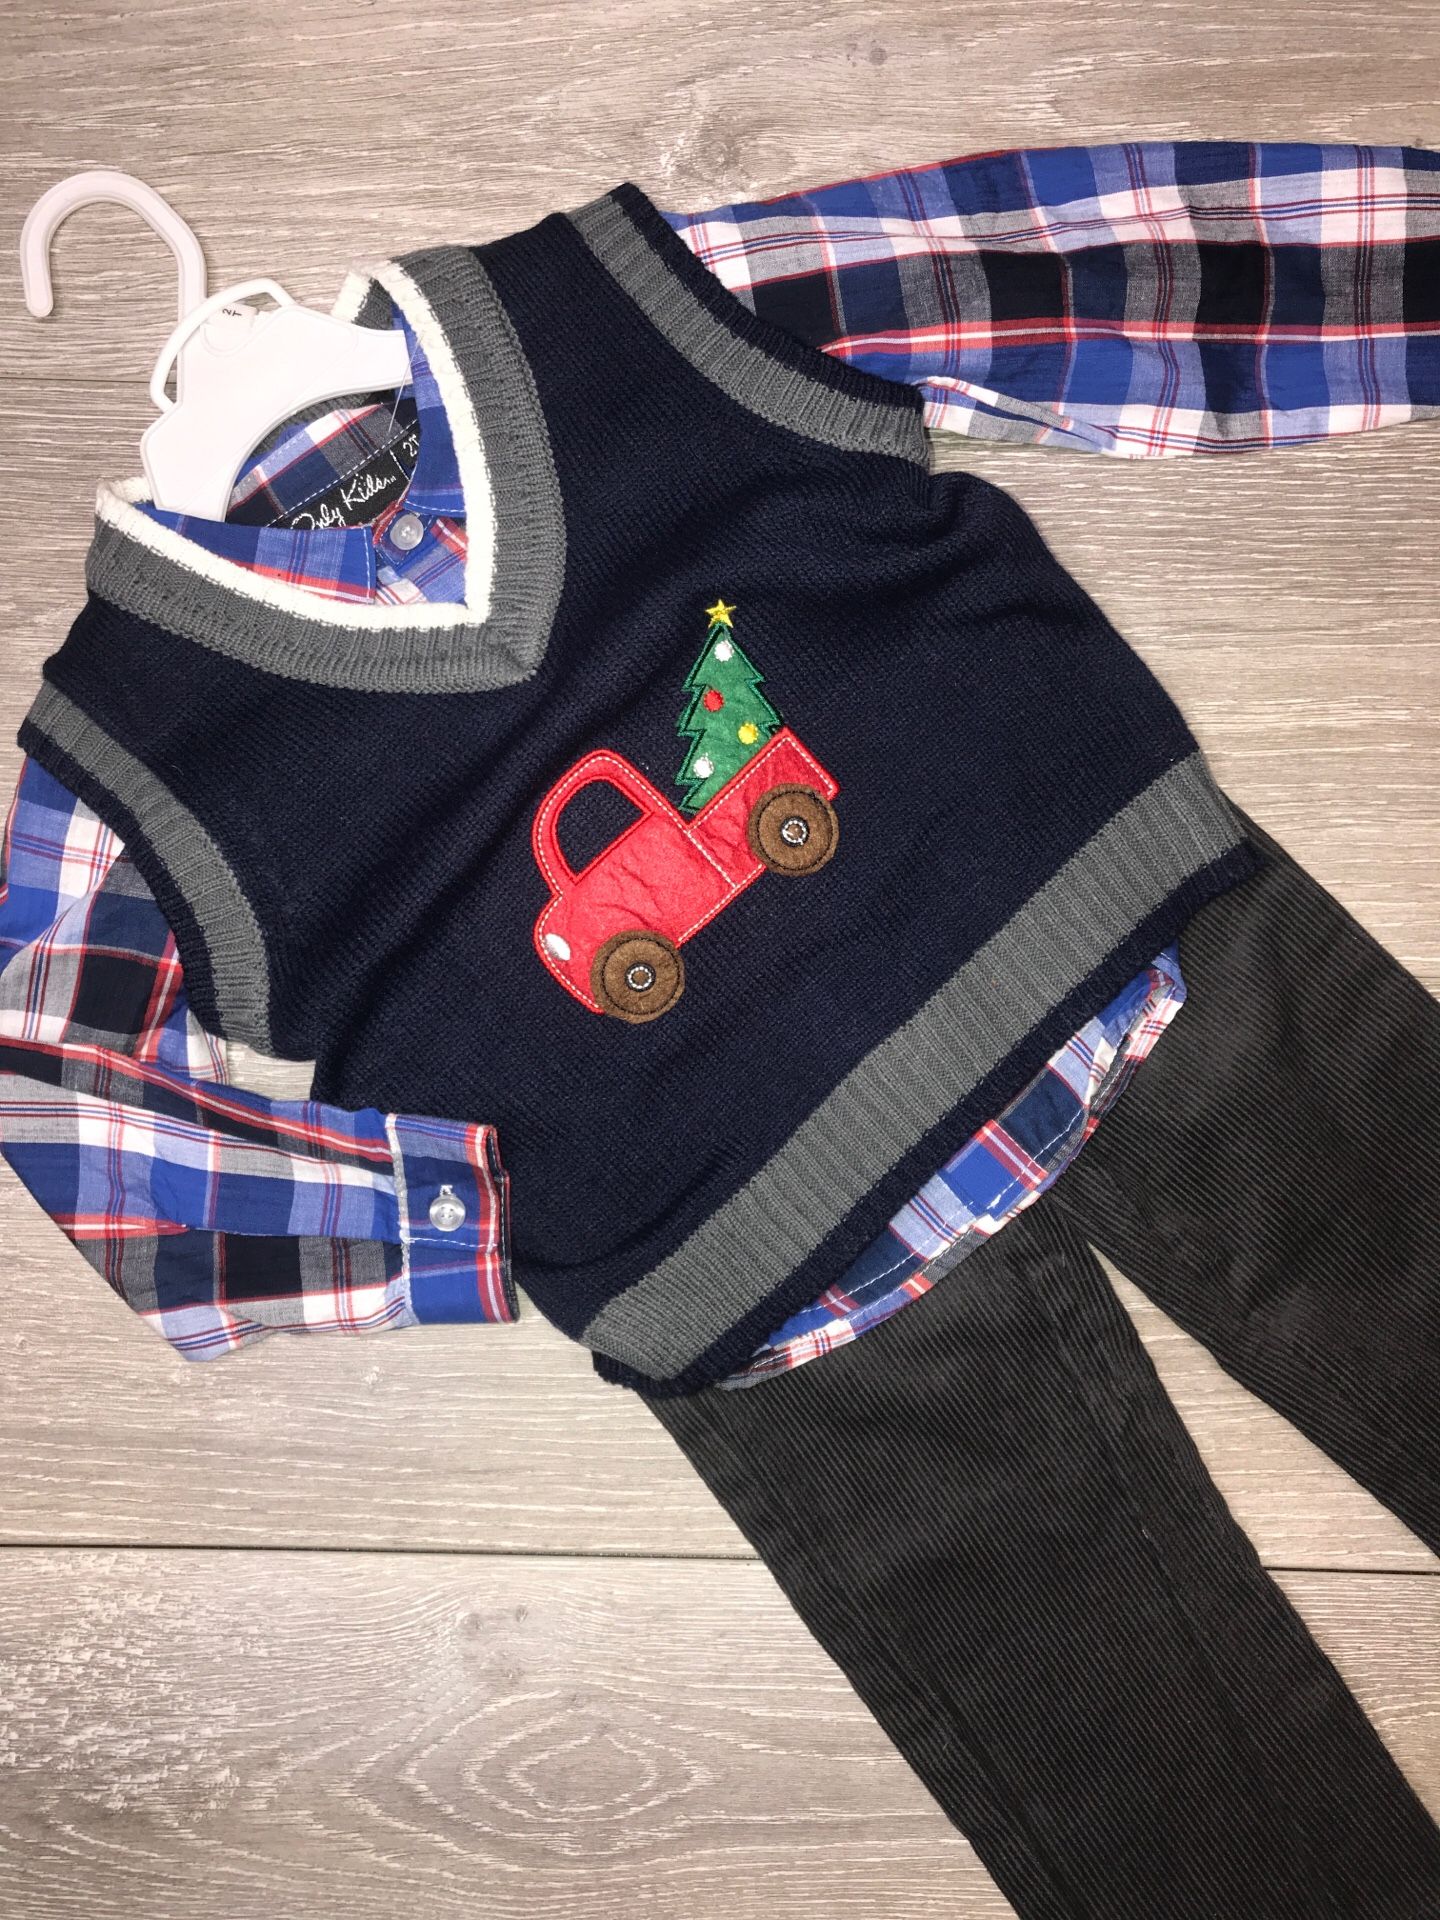 Toddler Boy Clothing 🎄Christmas Outfit 2T $12